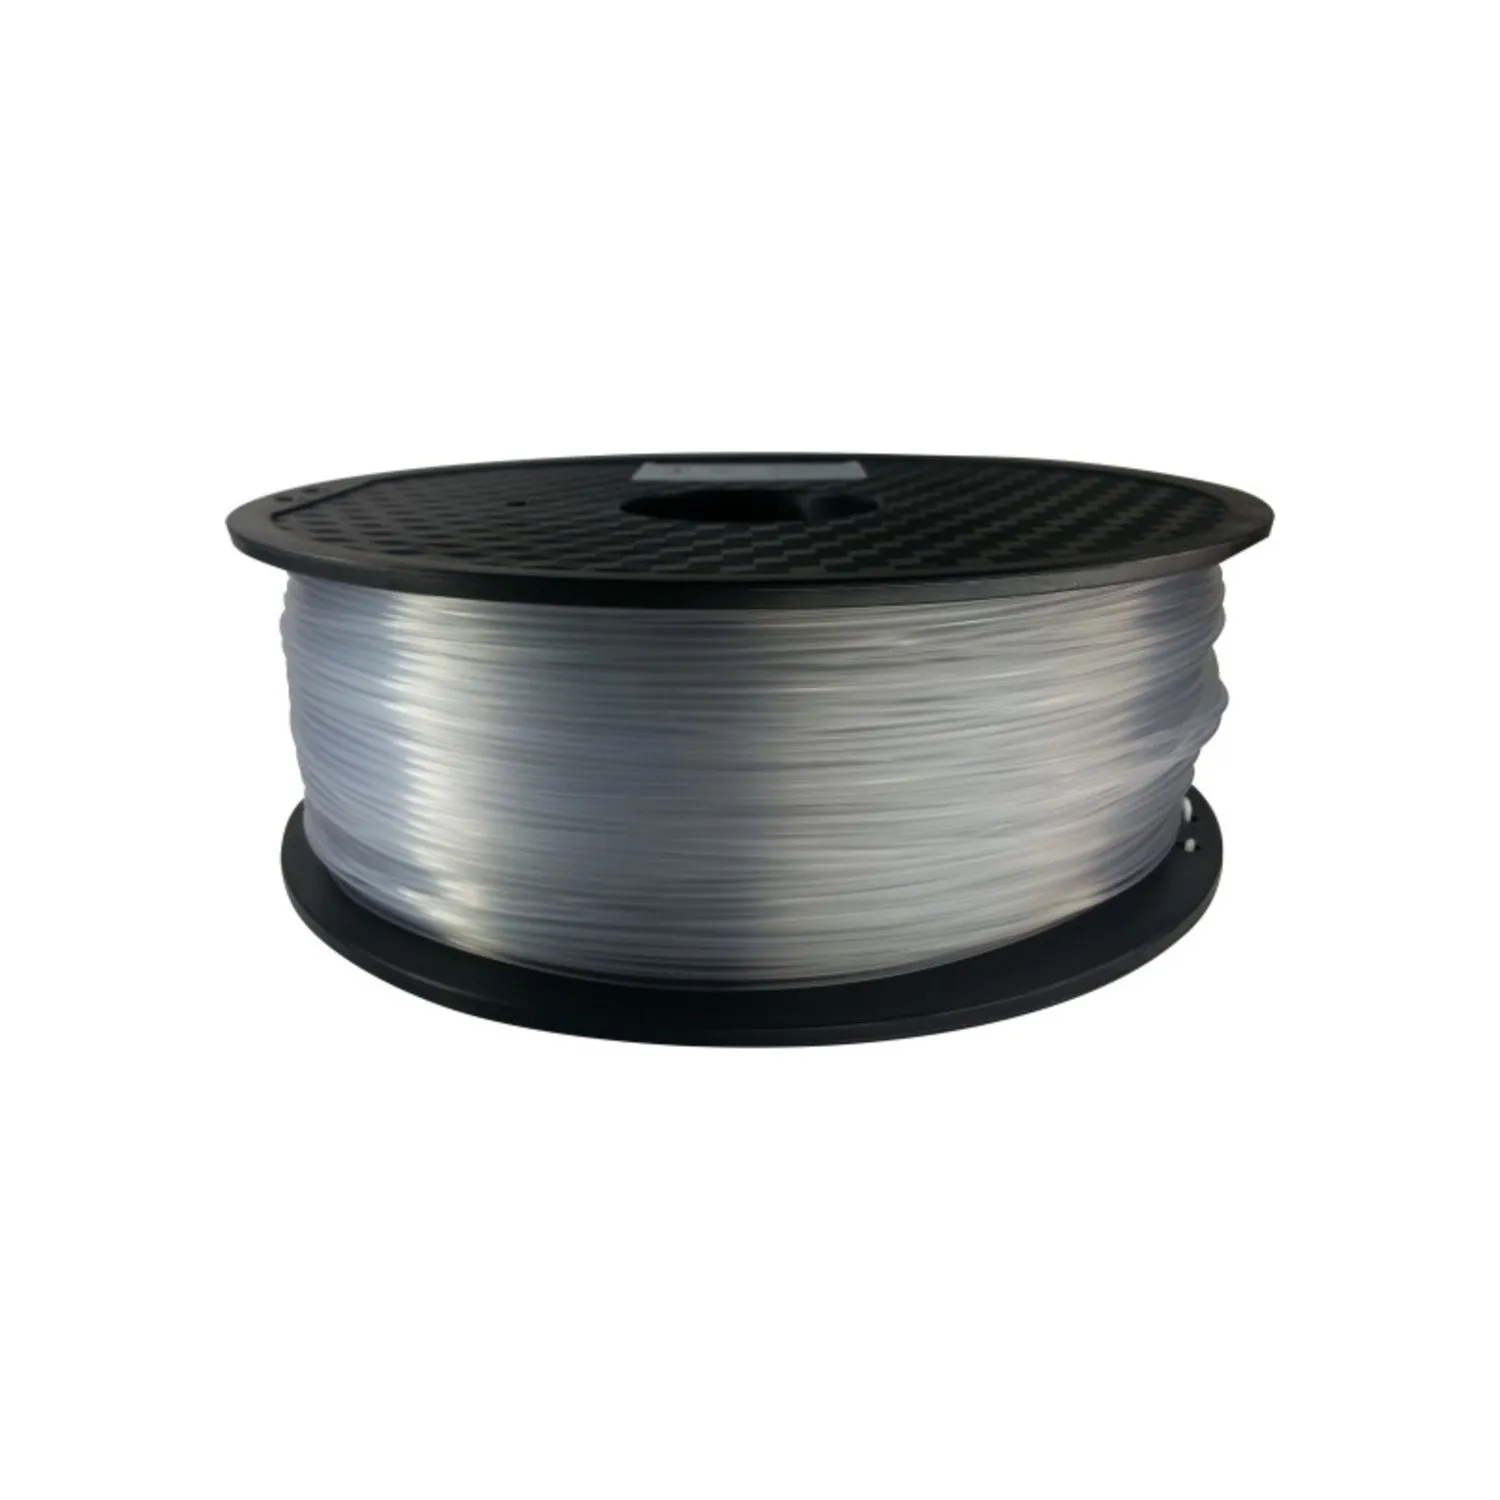 Photo of ABS Filament 1.75mm, 1Kg Roll - Clear / Transparent